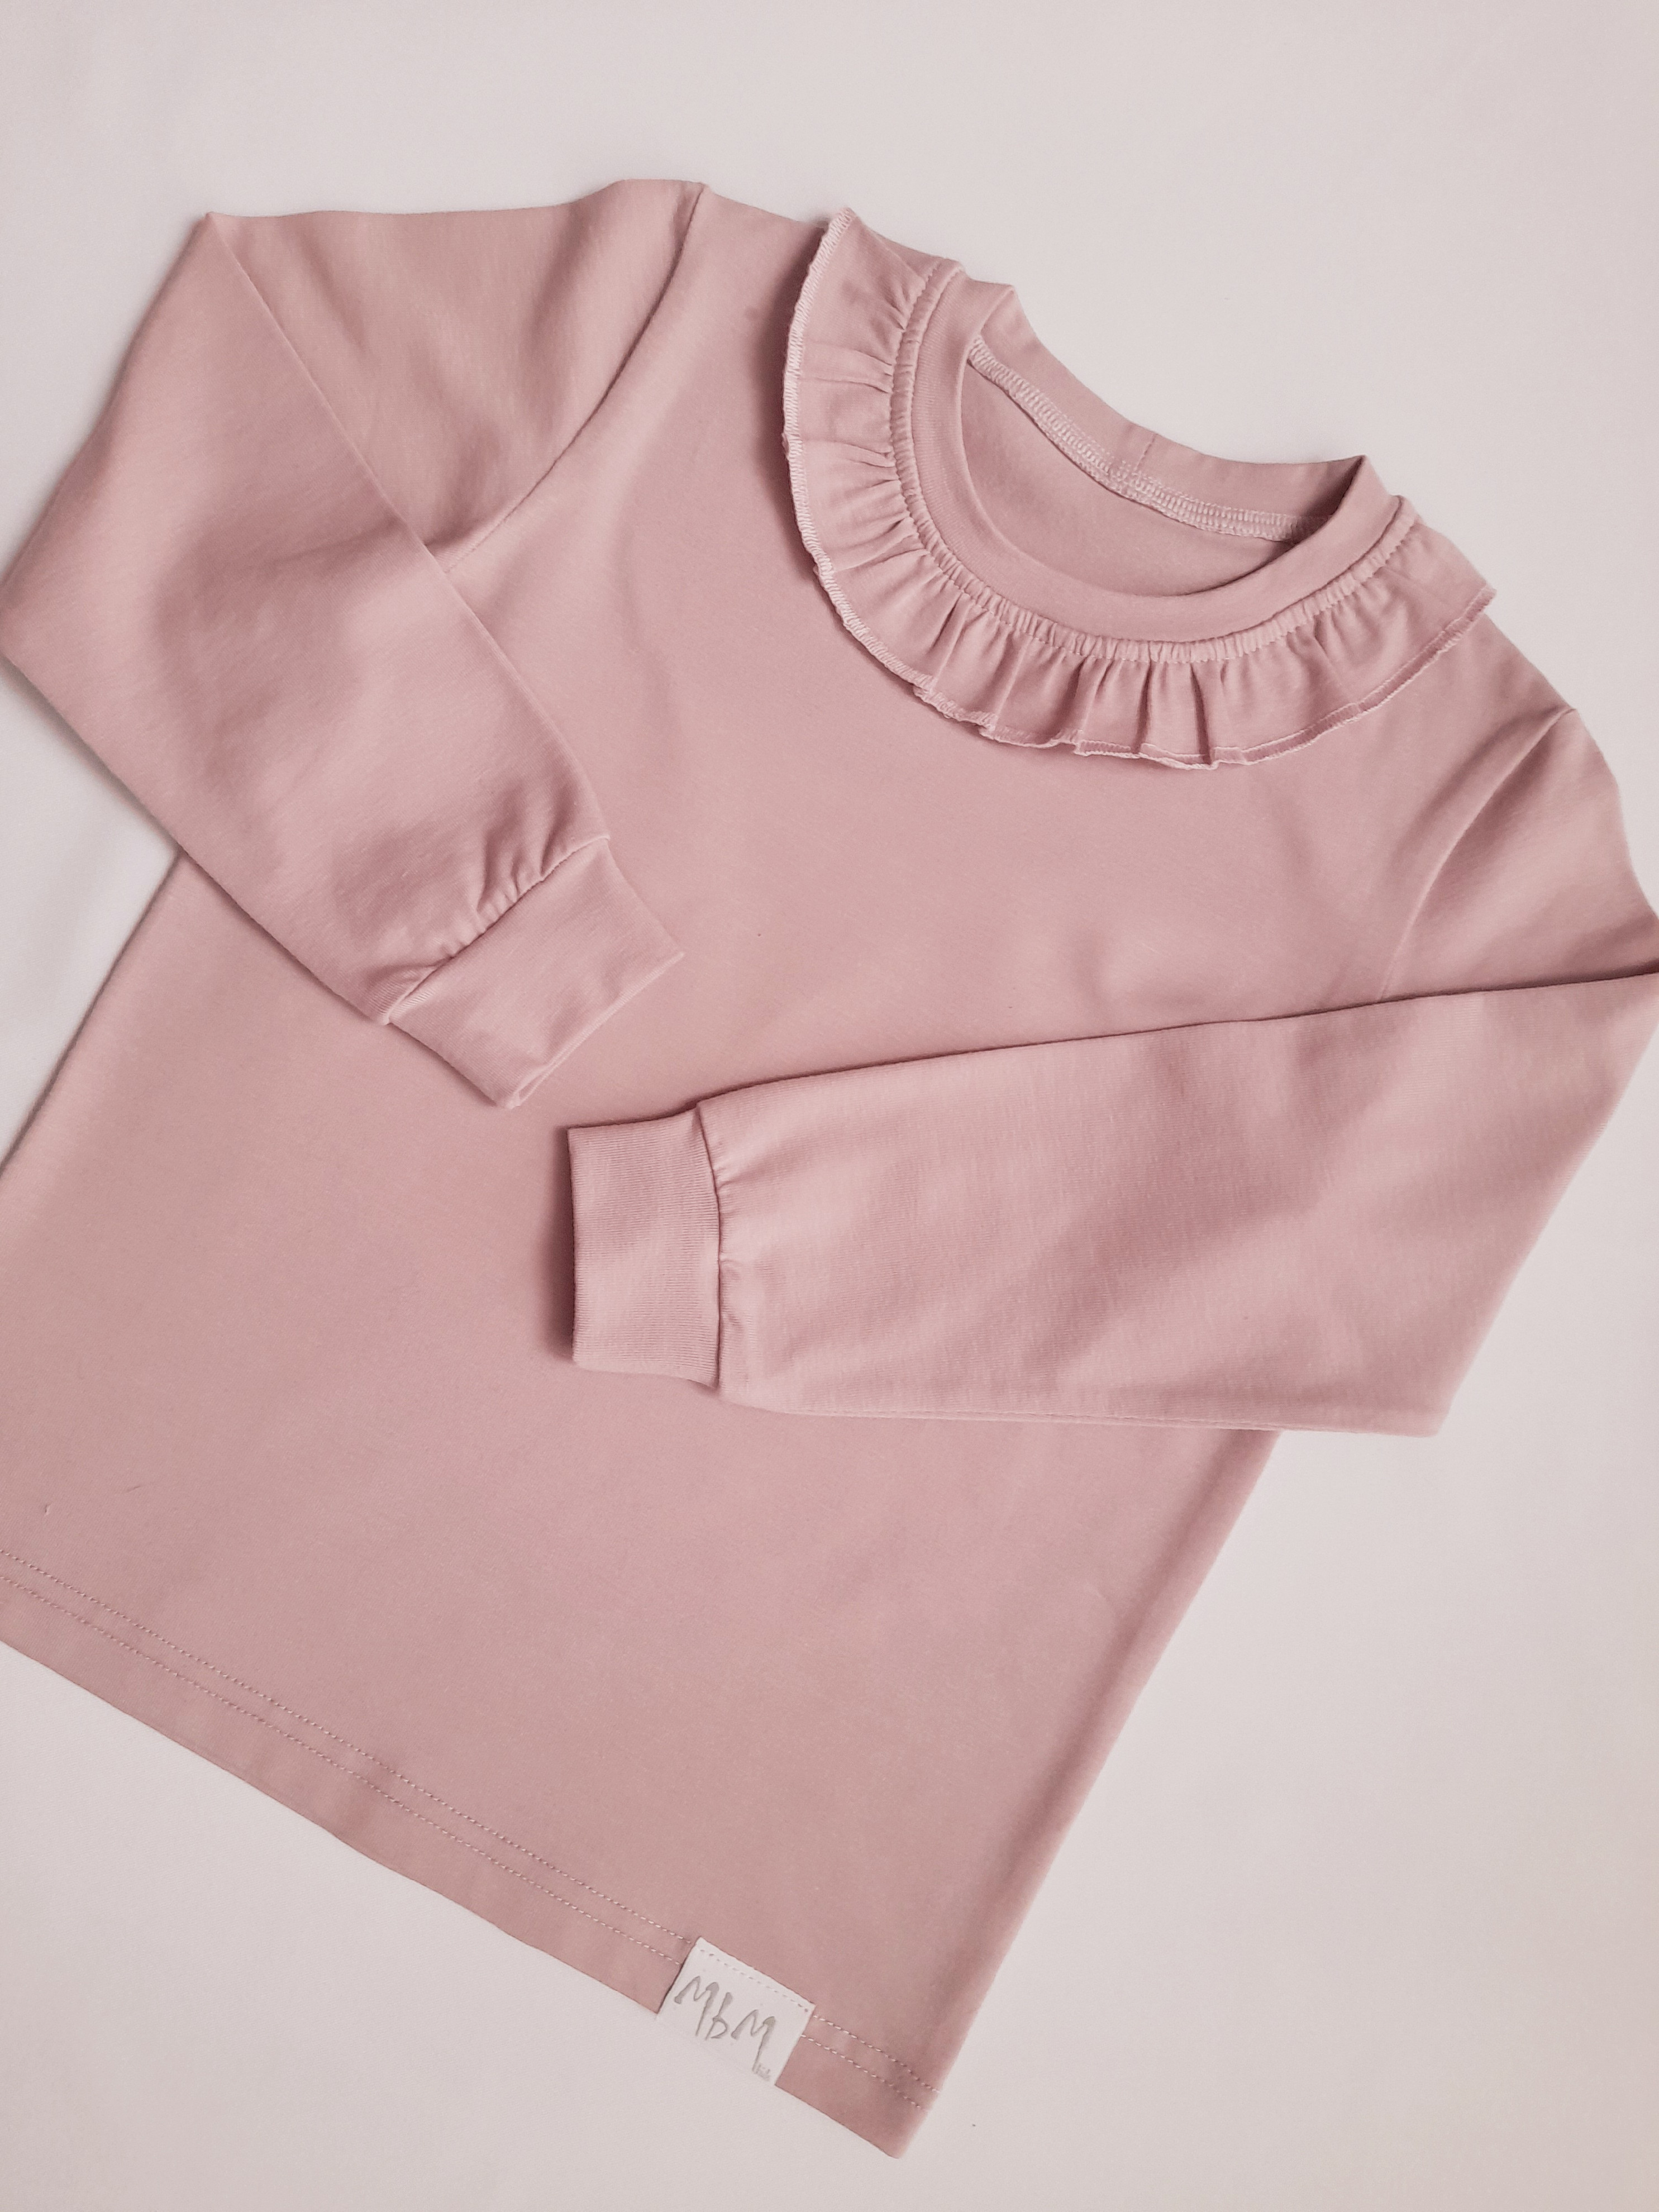 CHILD T-SHIRT DUSTY PINK Velikost: 134